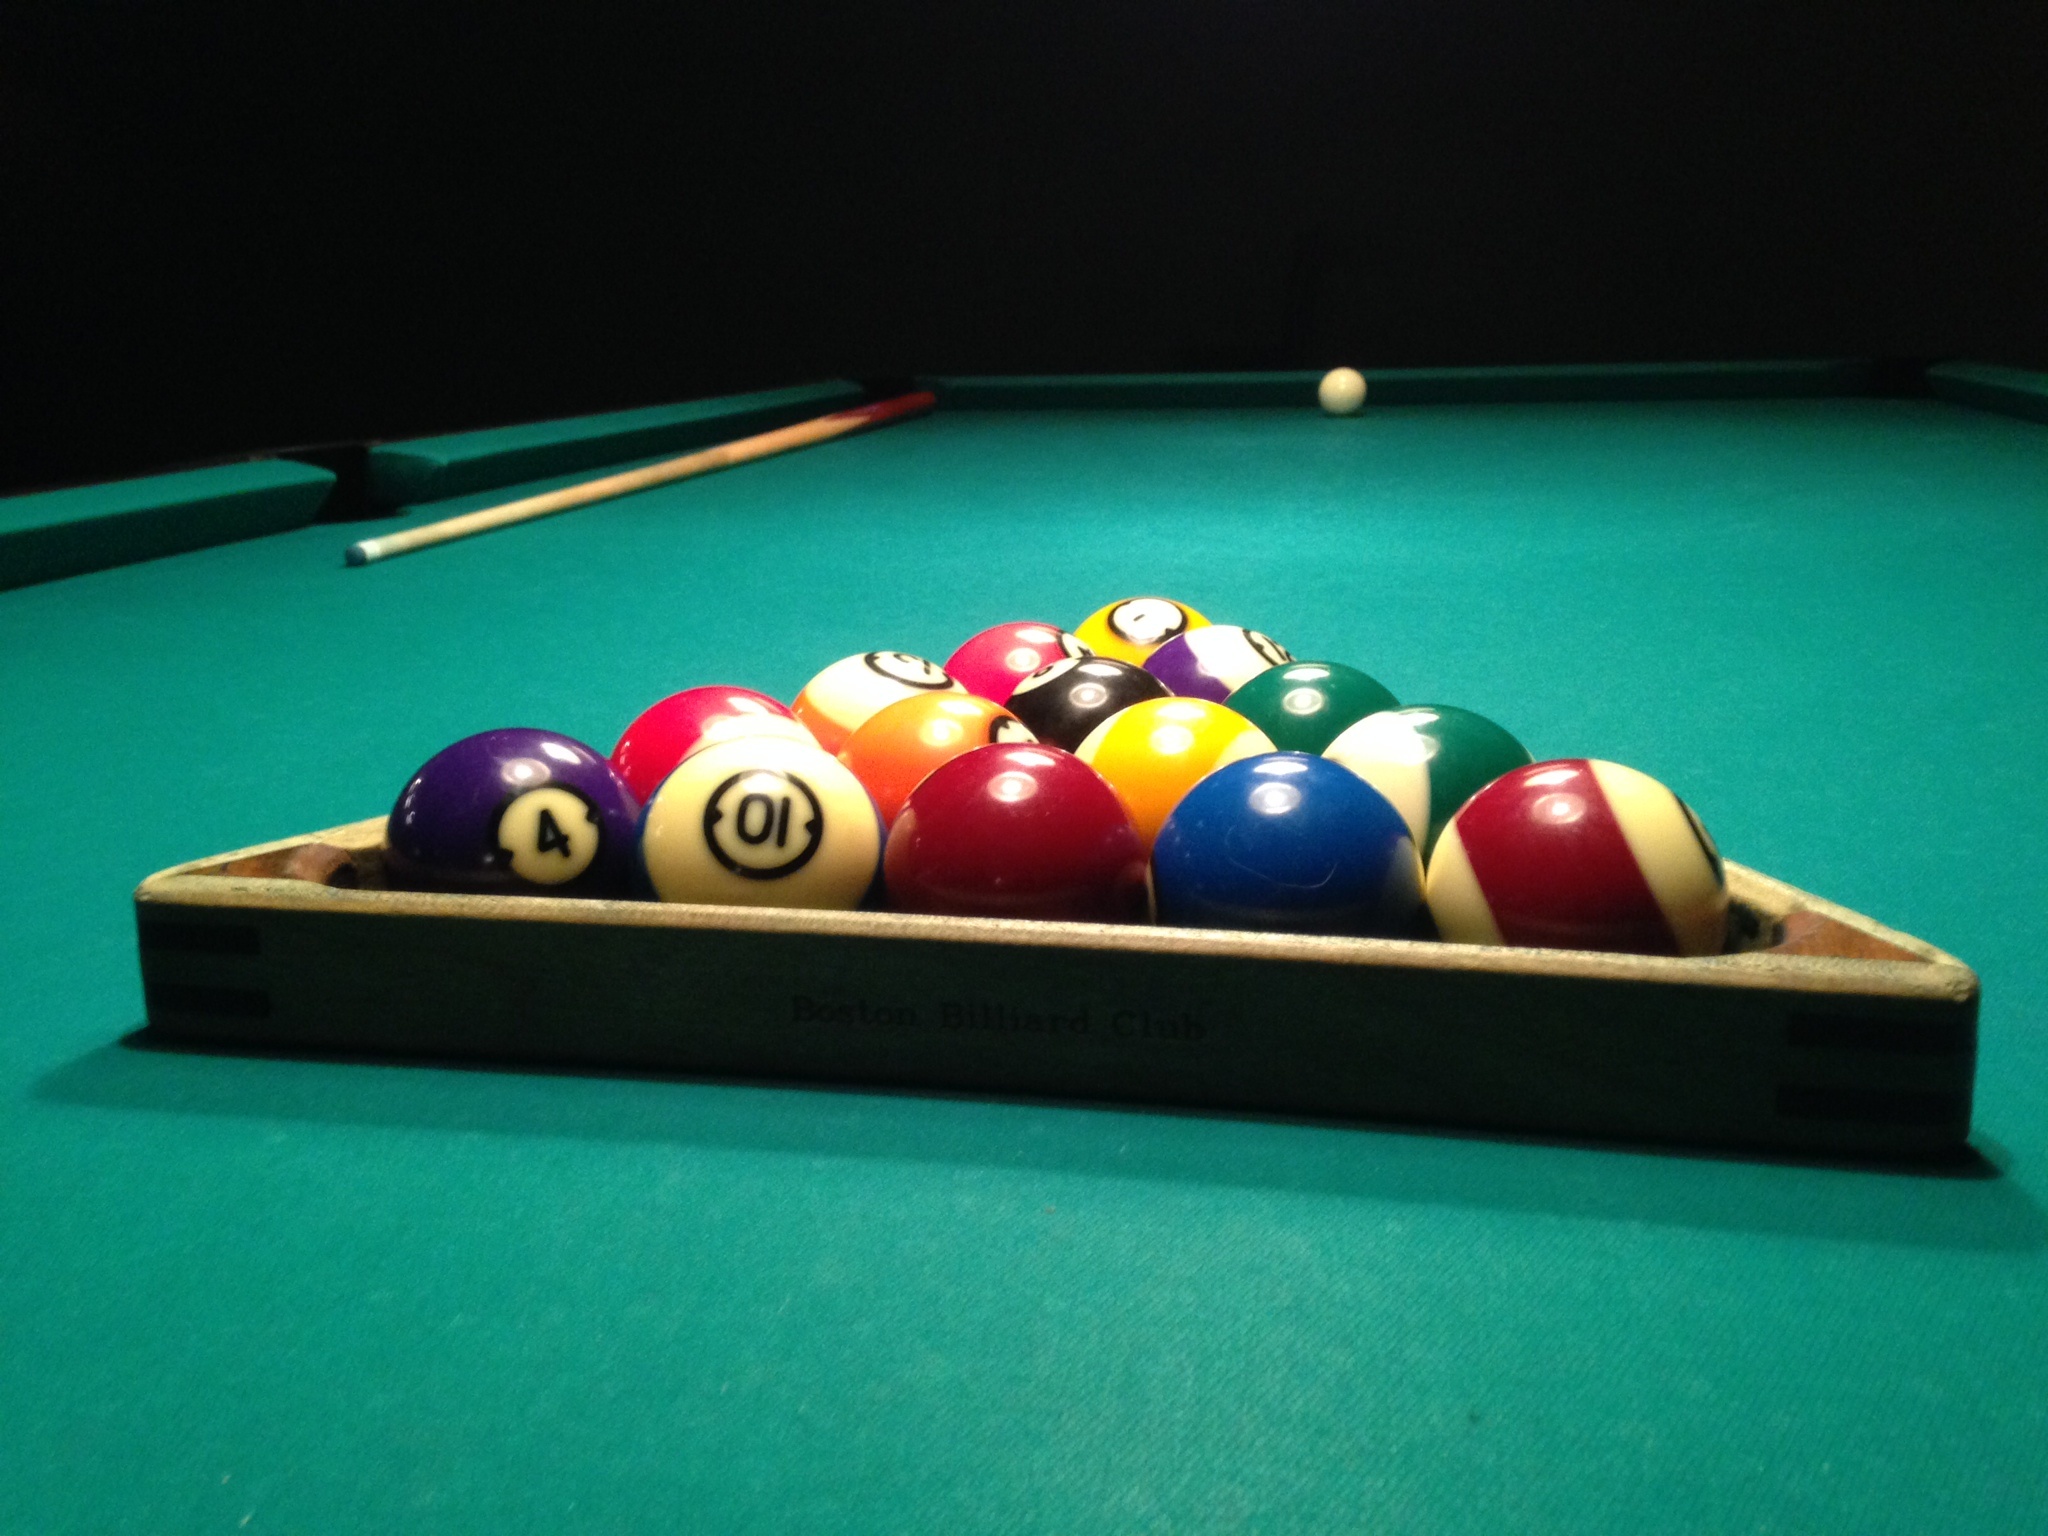 Billiards: Fifteen object balls in a rack with a white cue ball in its position, Last preparations before a break shot, Staff. 2050x1540 HD Background.